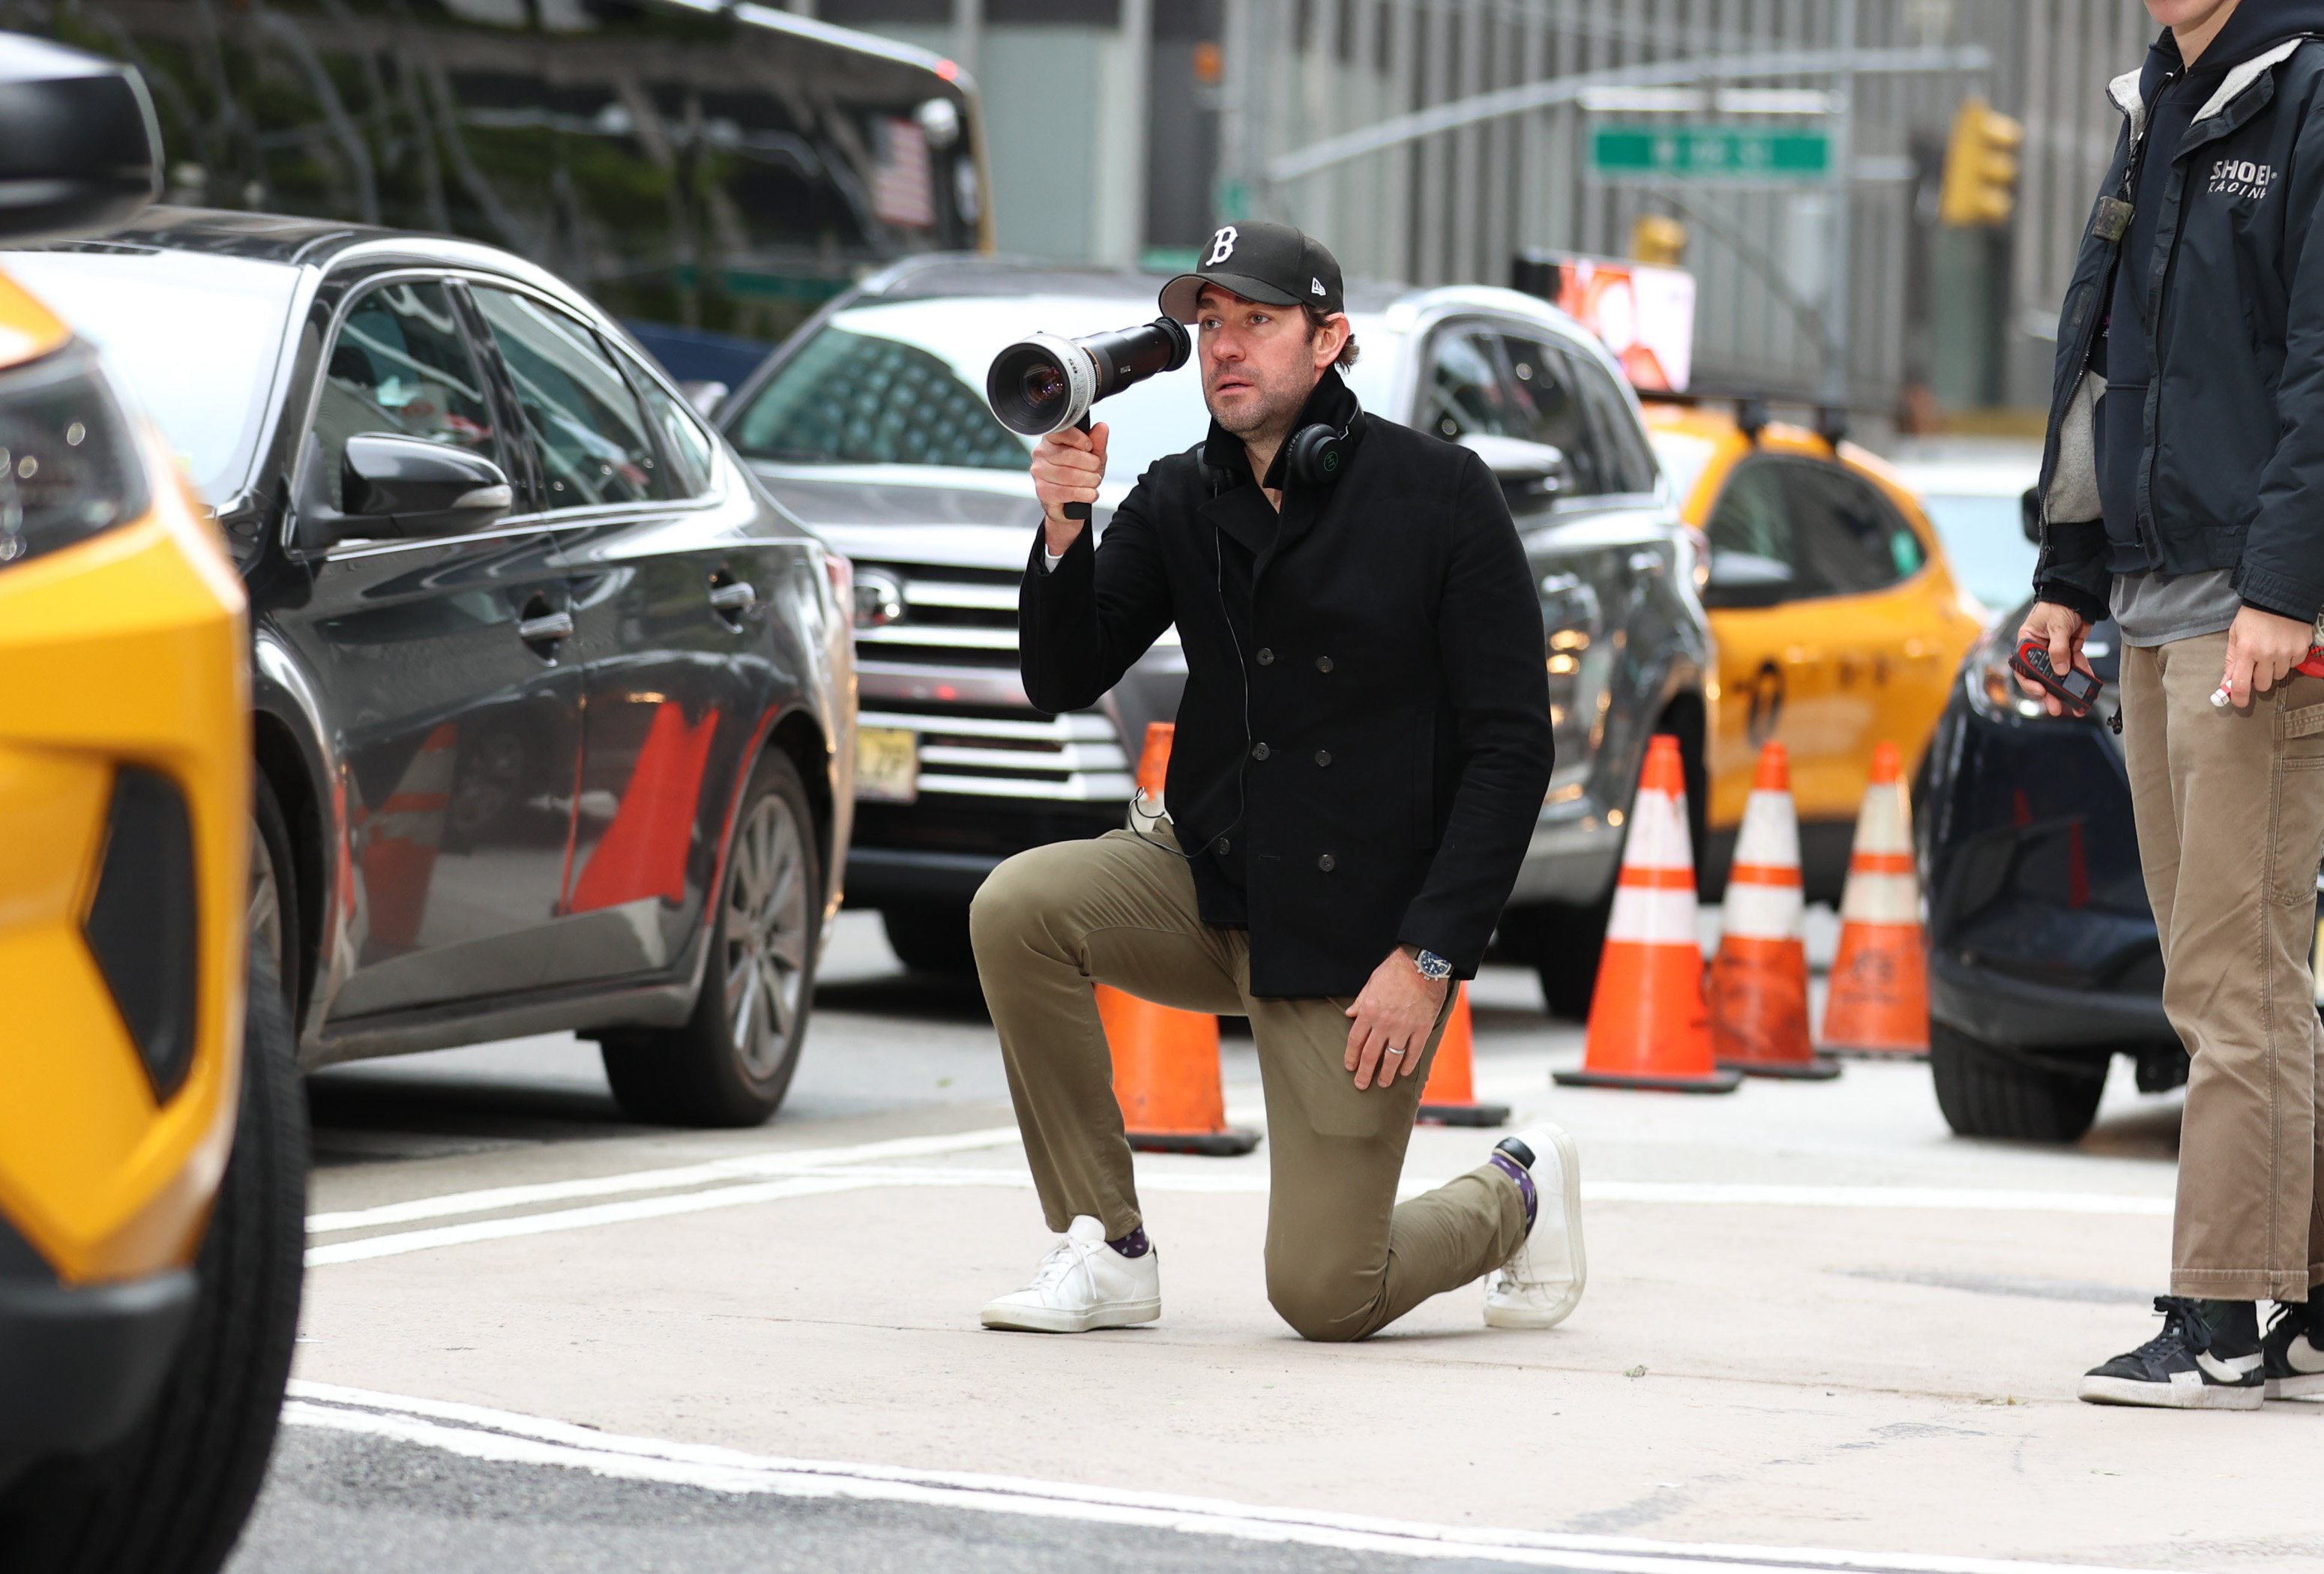 John Krasinski is seen on the set of "Imaginary Friends" on October 3, 2022, in New York City | Source: Getty Images